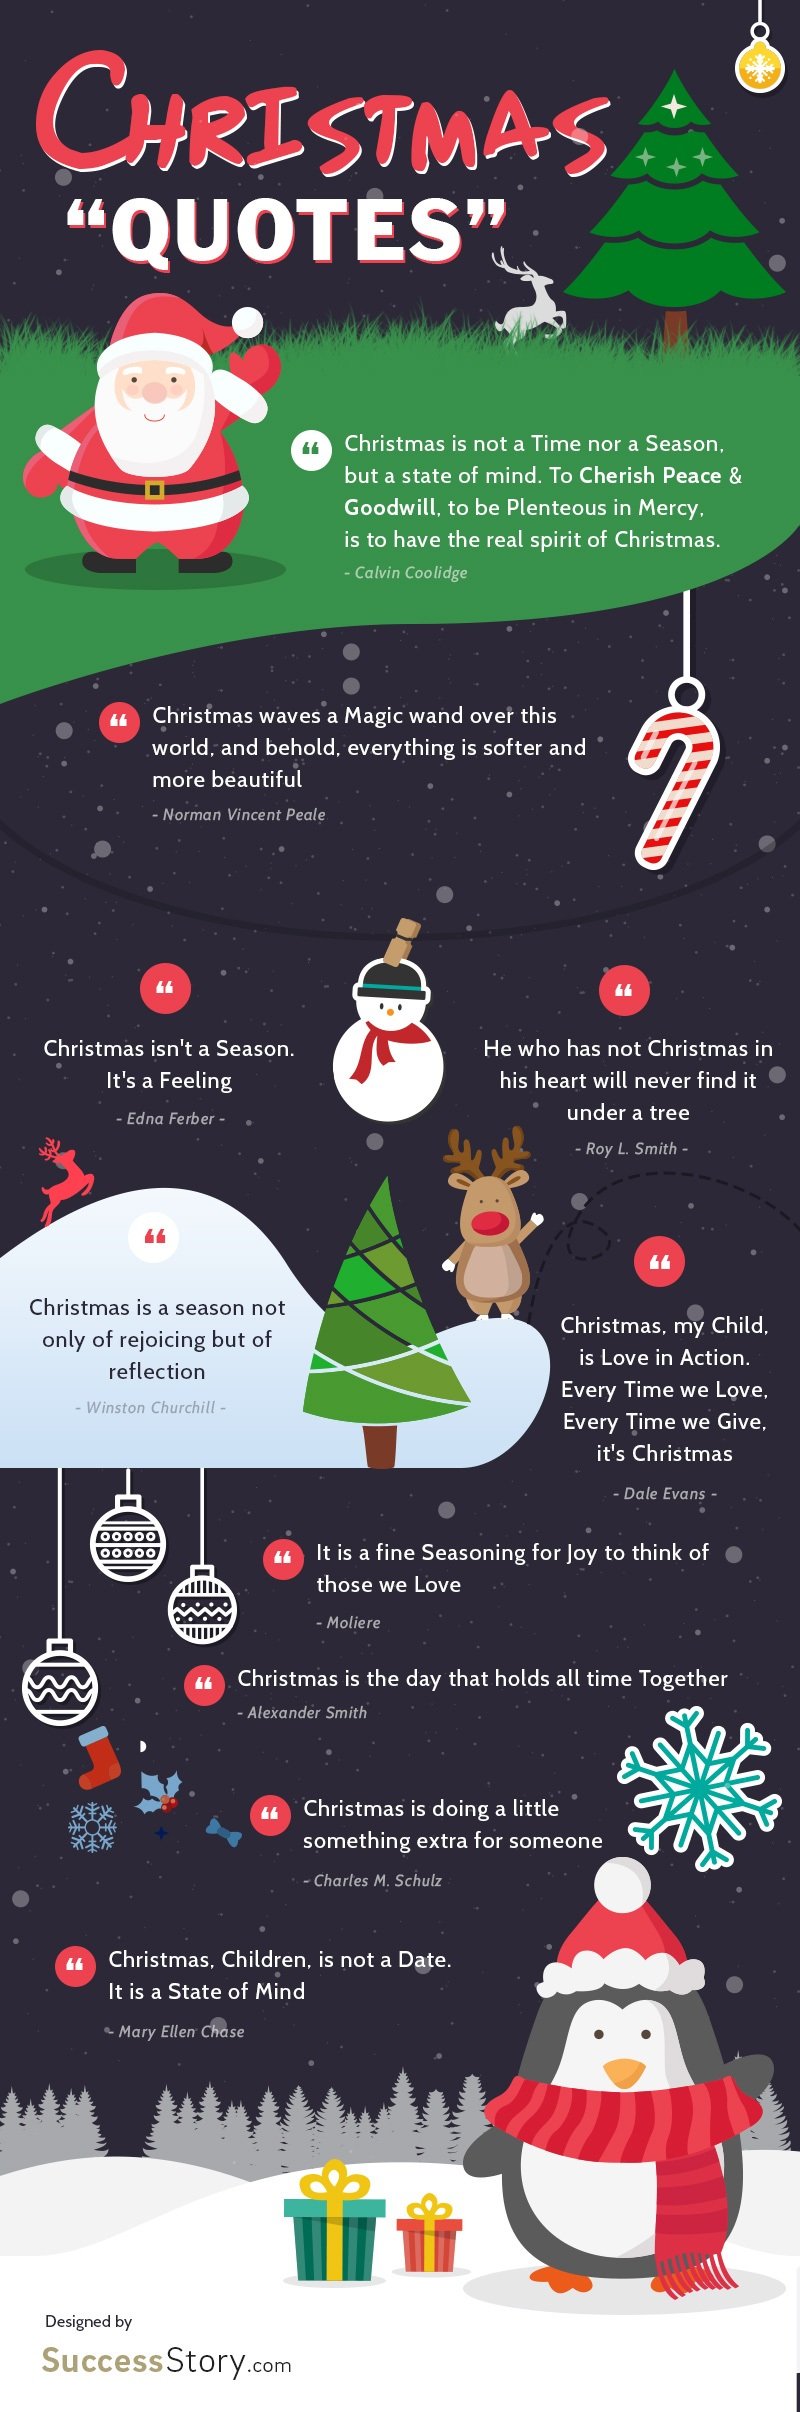 Christmas-Quote-infographic (1)